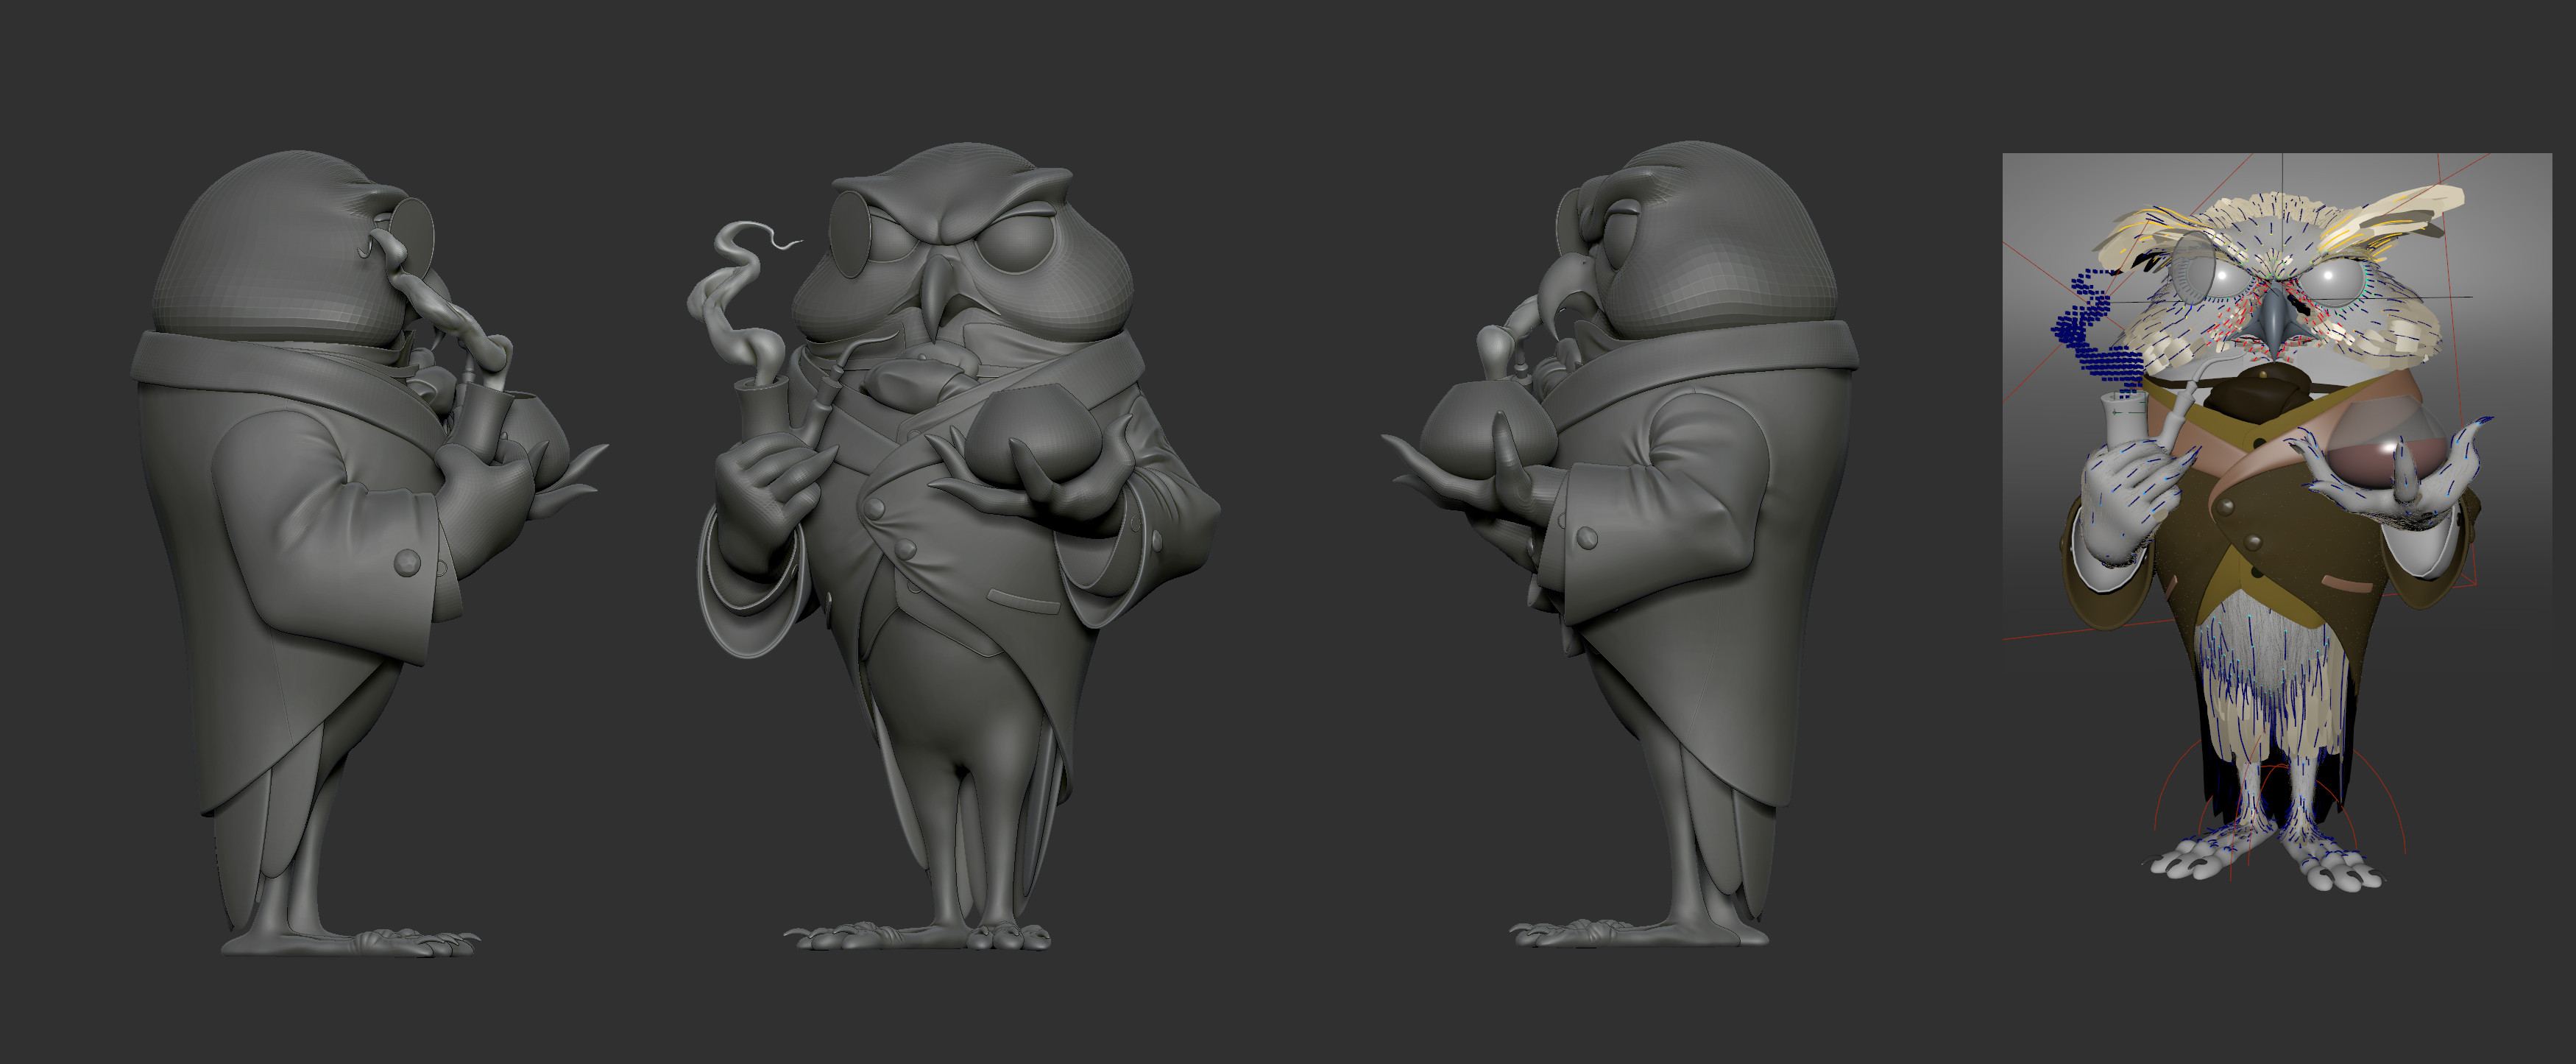 zbrush shots, and the yeti grooms/feathers.